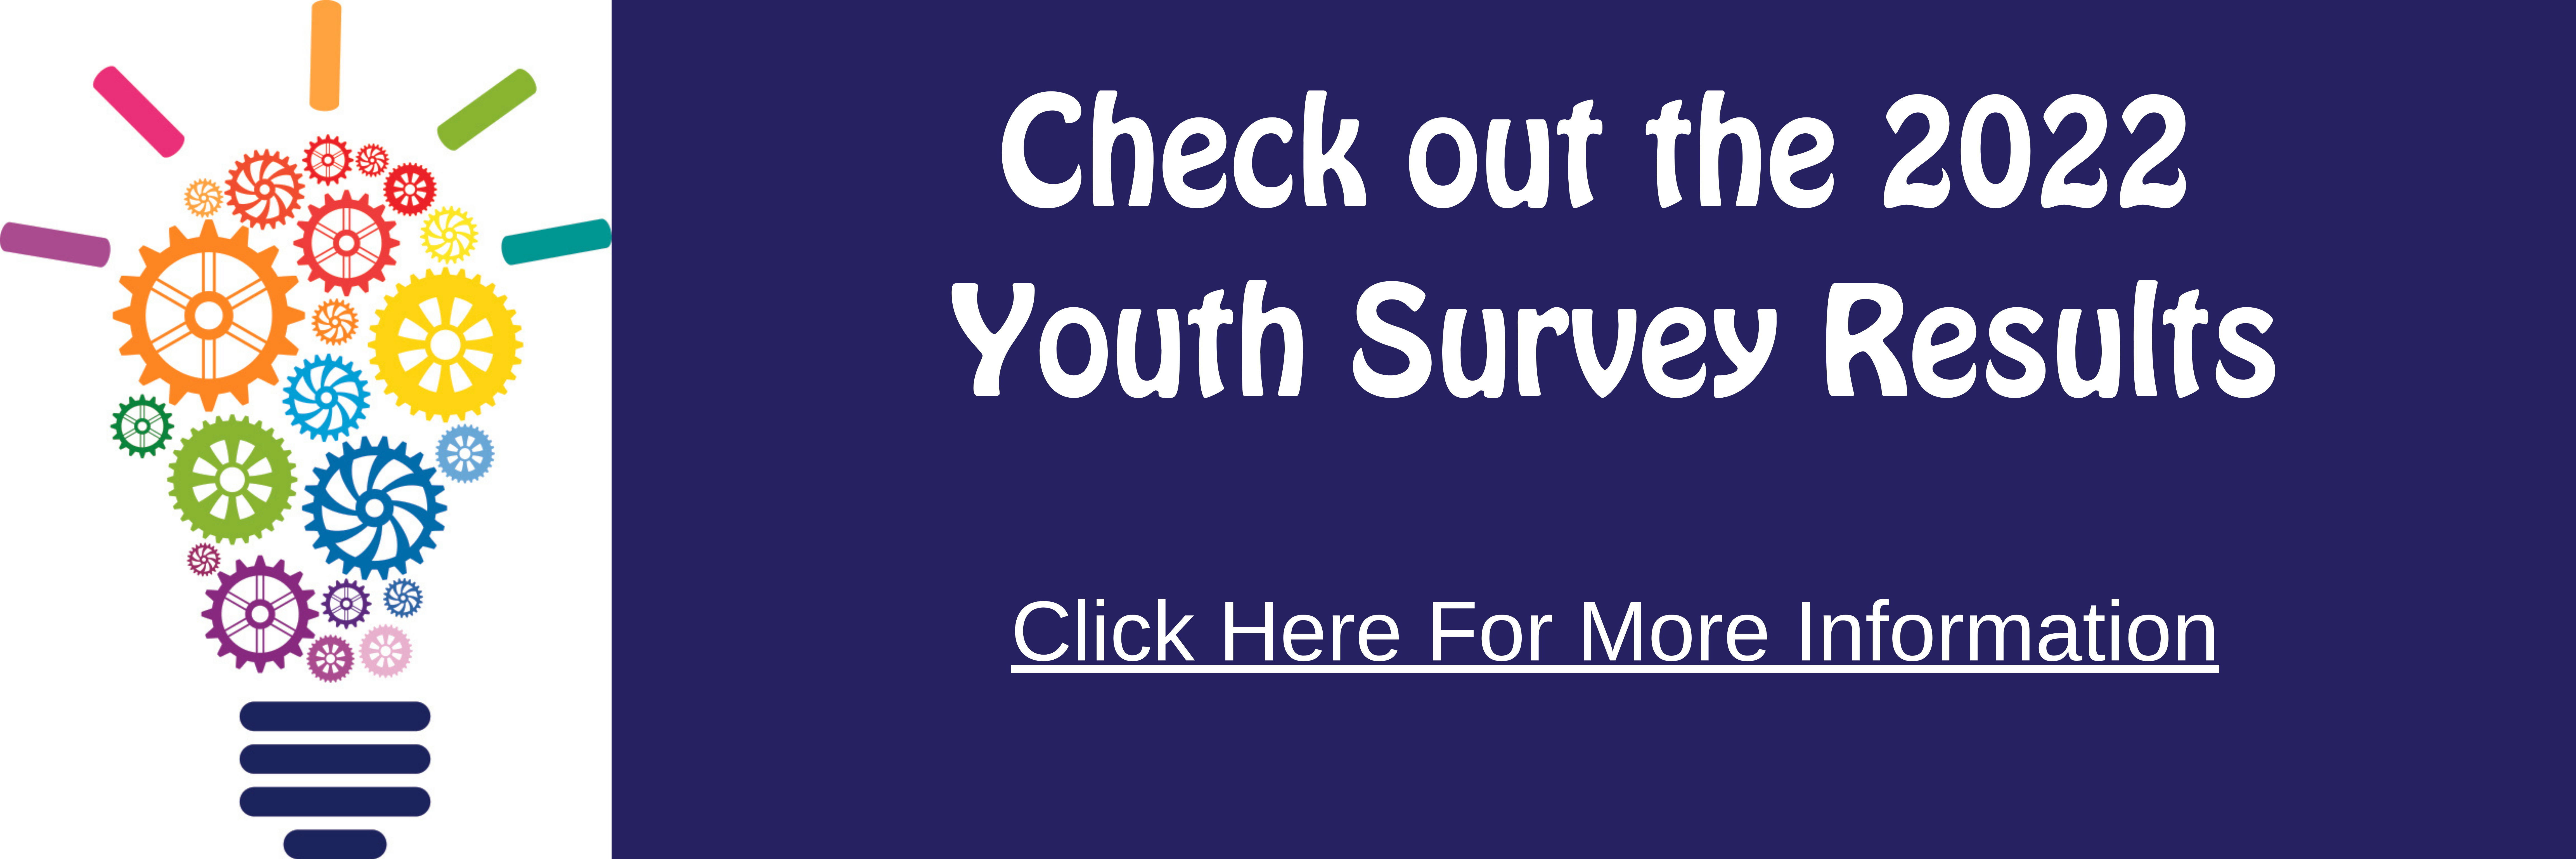 Youth Survey Banner